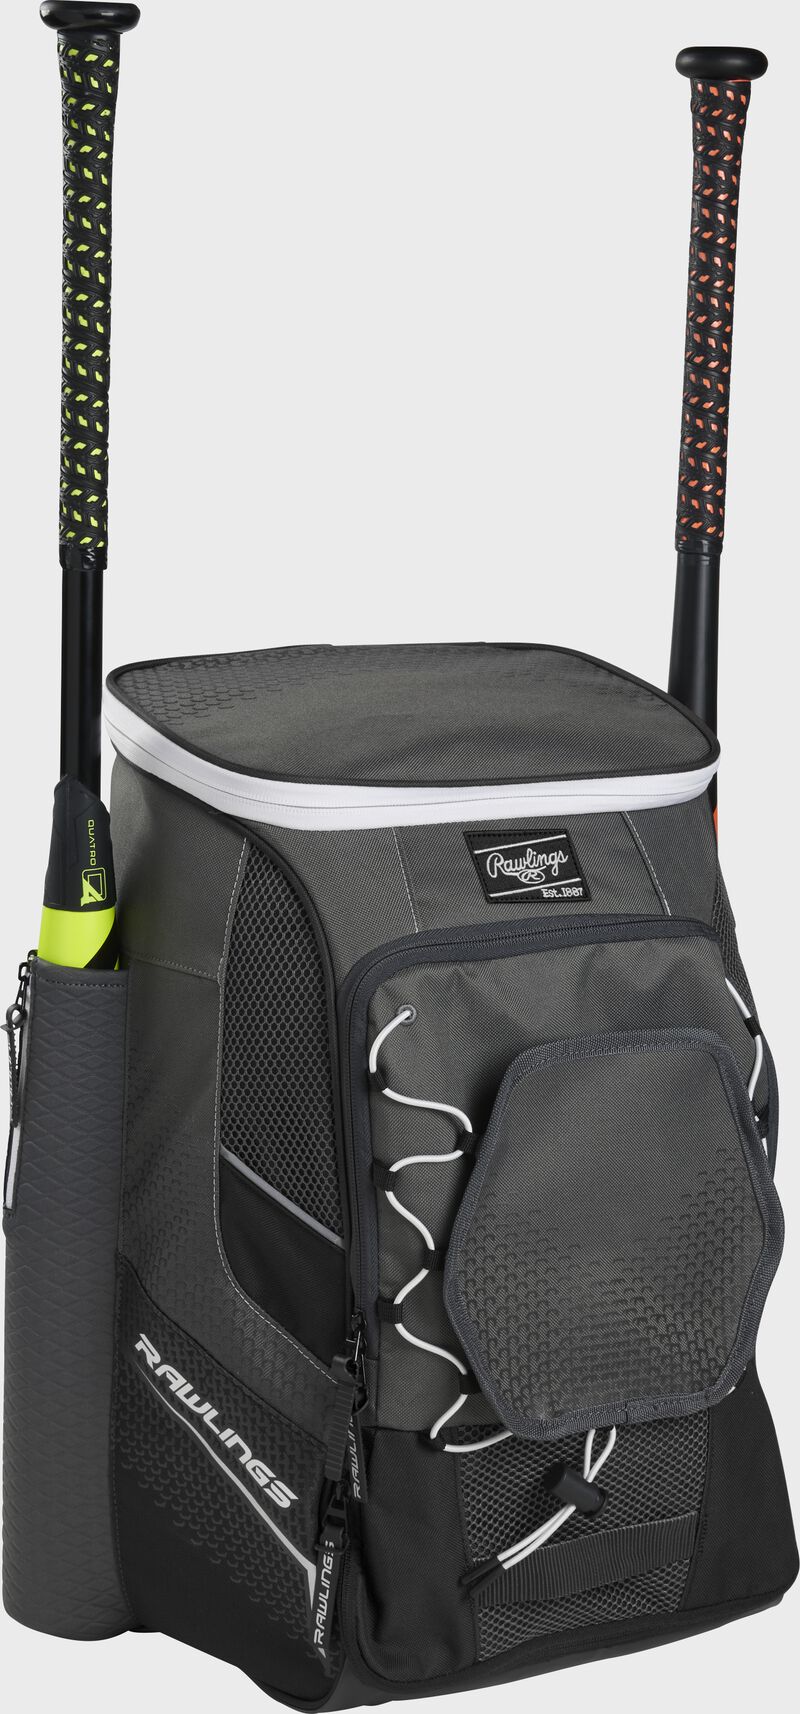 Front left angle of a black Rawlings Impulse baseball gear backpack with two bats - SKU: IMPLSE-B loading=